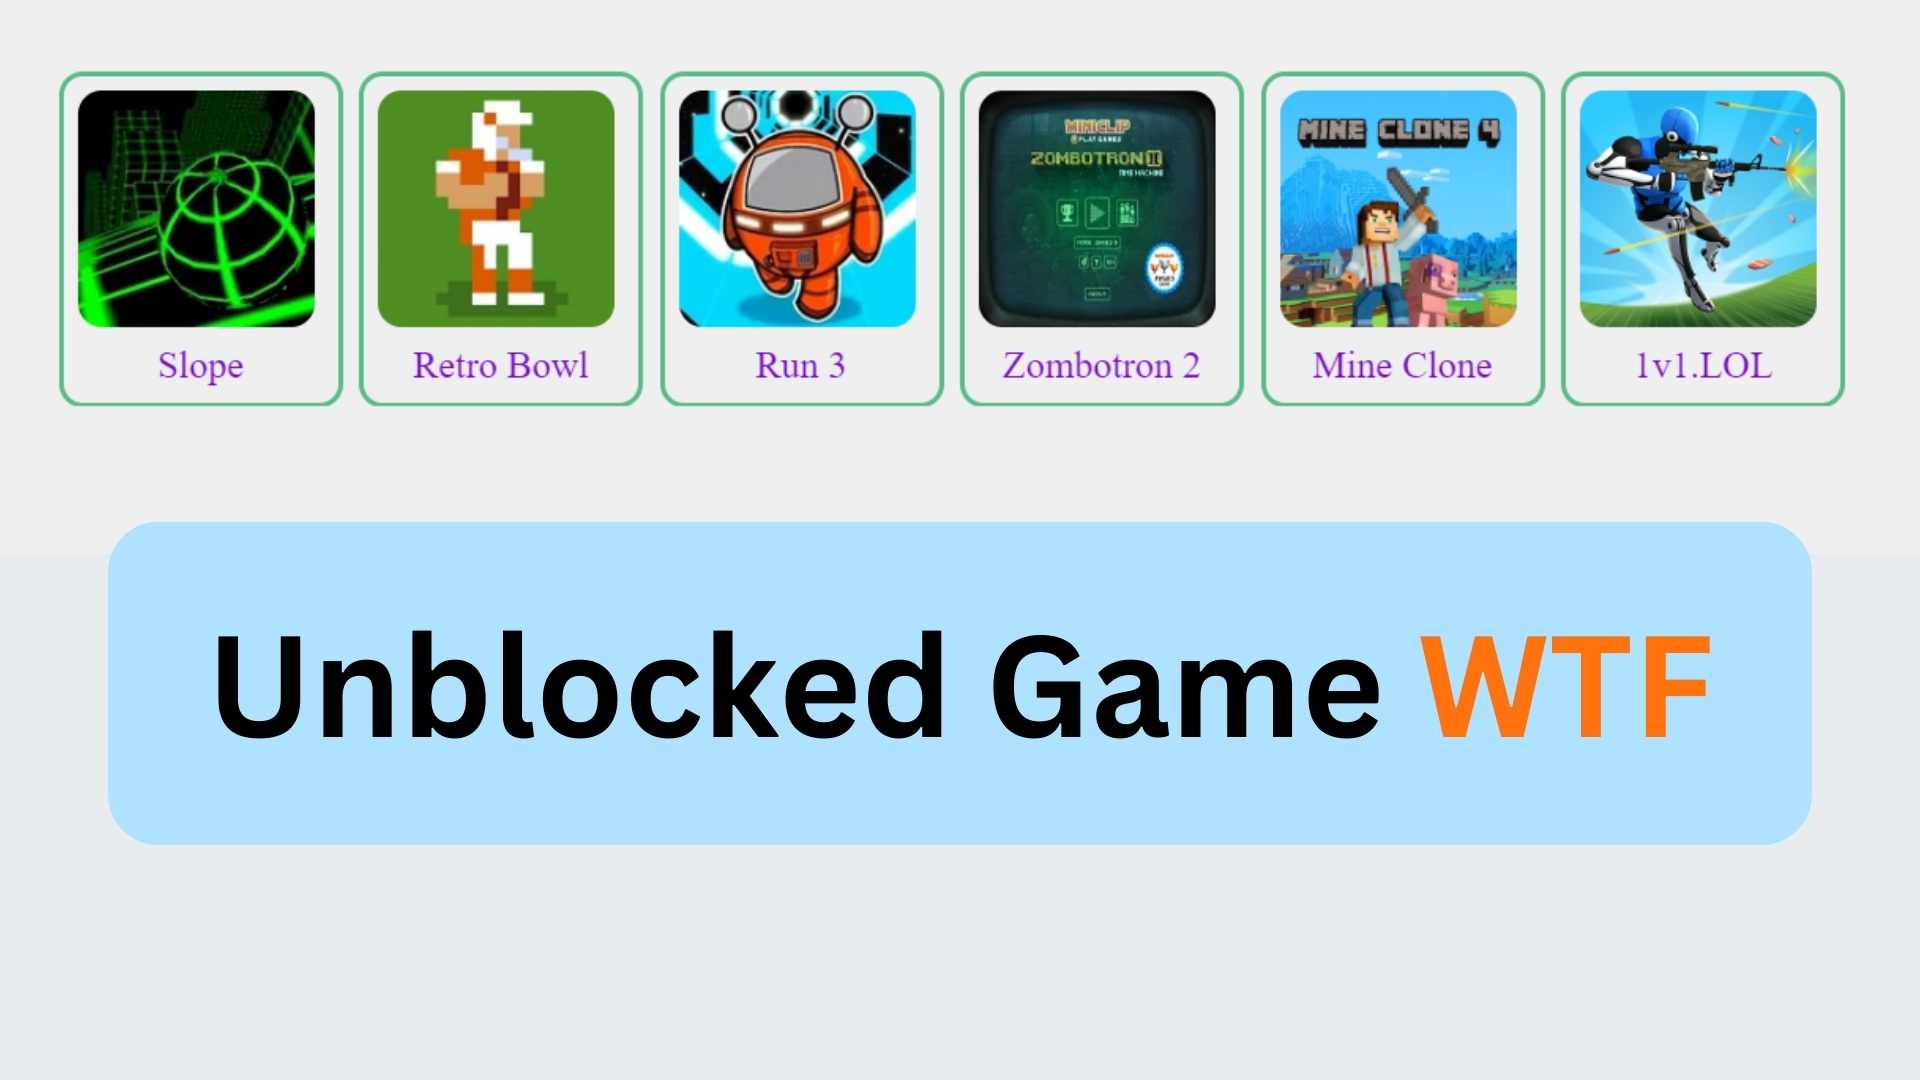 The Controversial World of Unblocked Games: A Deep Dive into WTF Unblocked Games